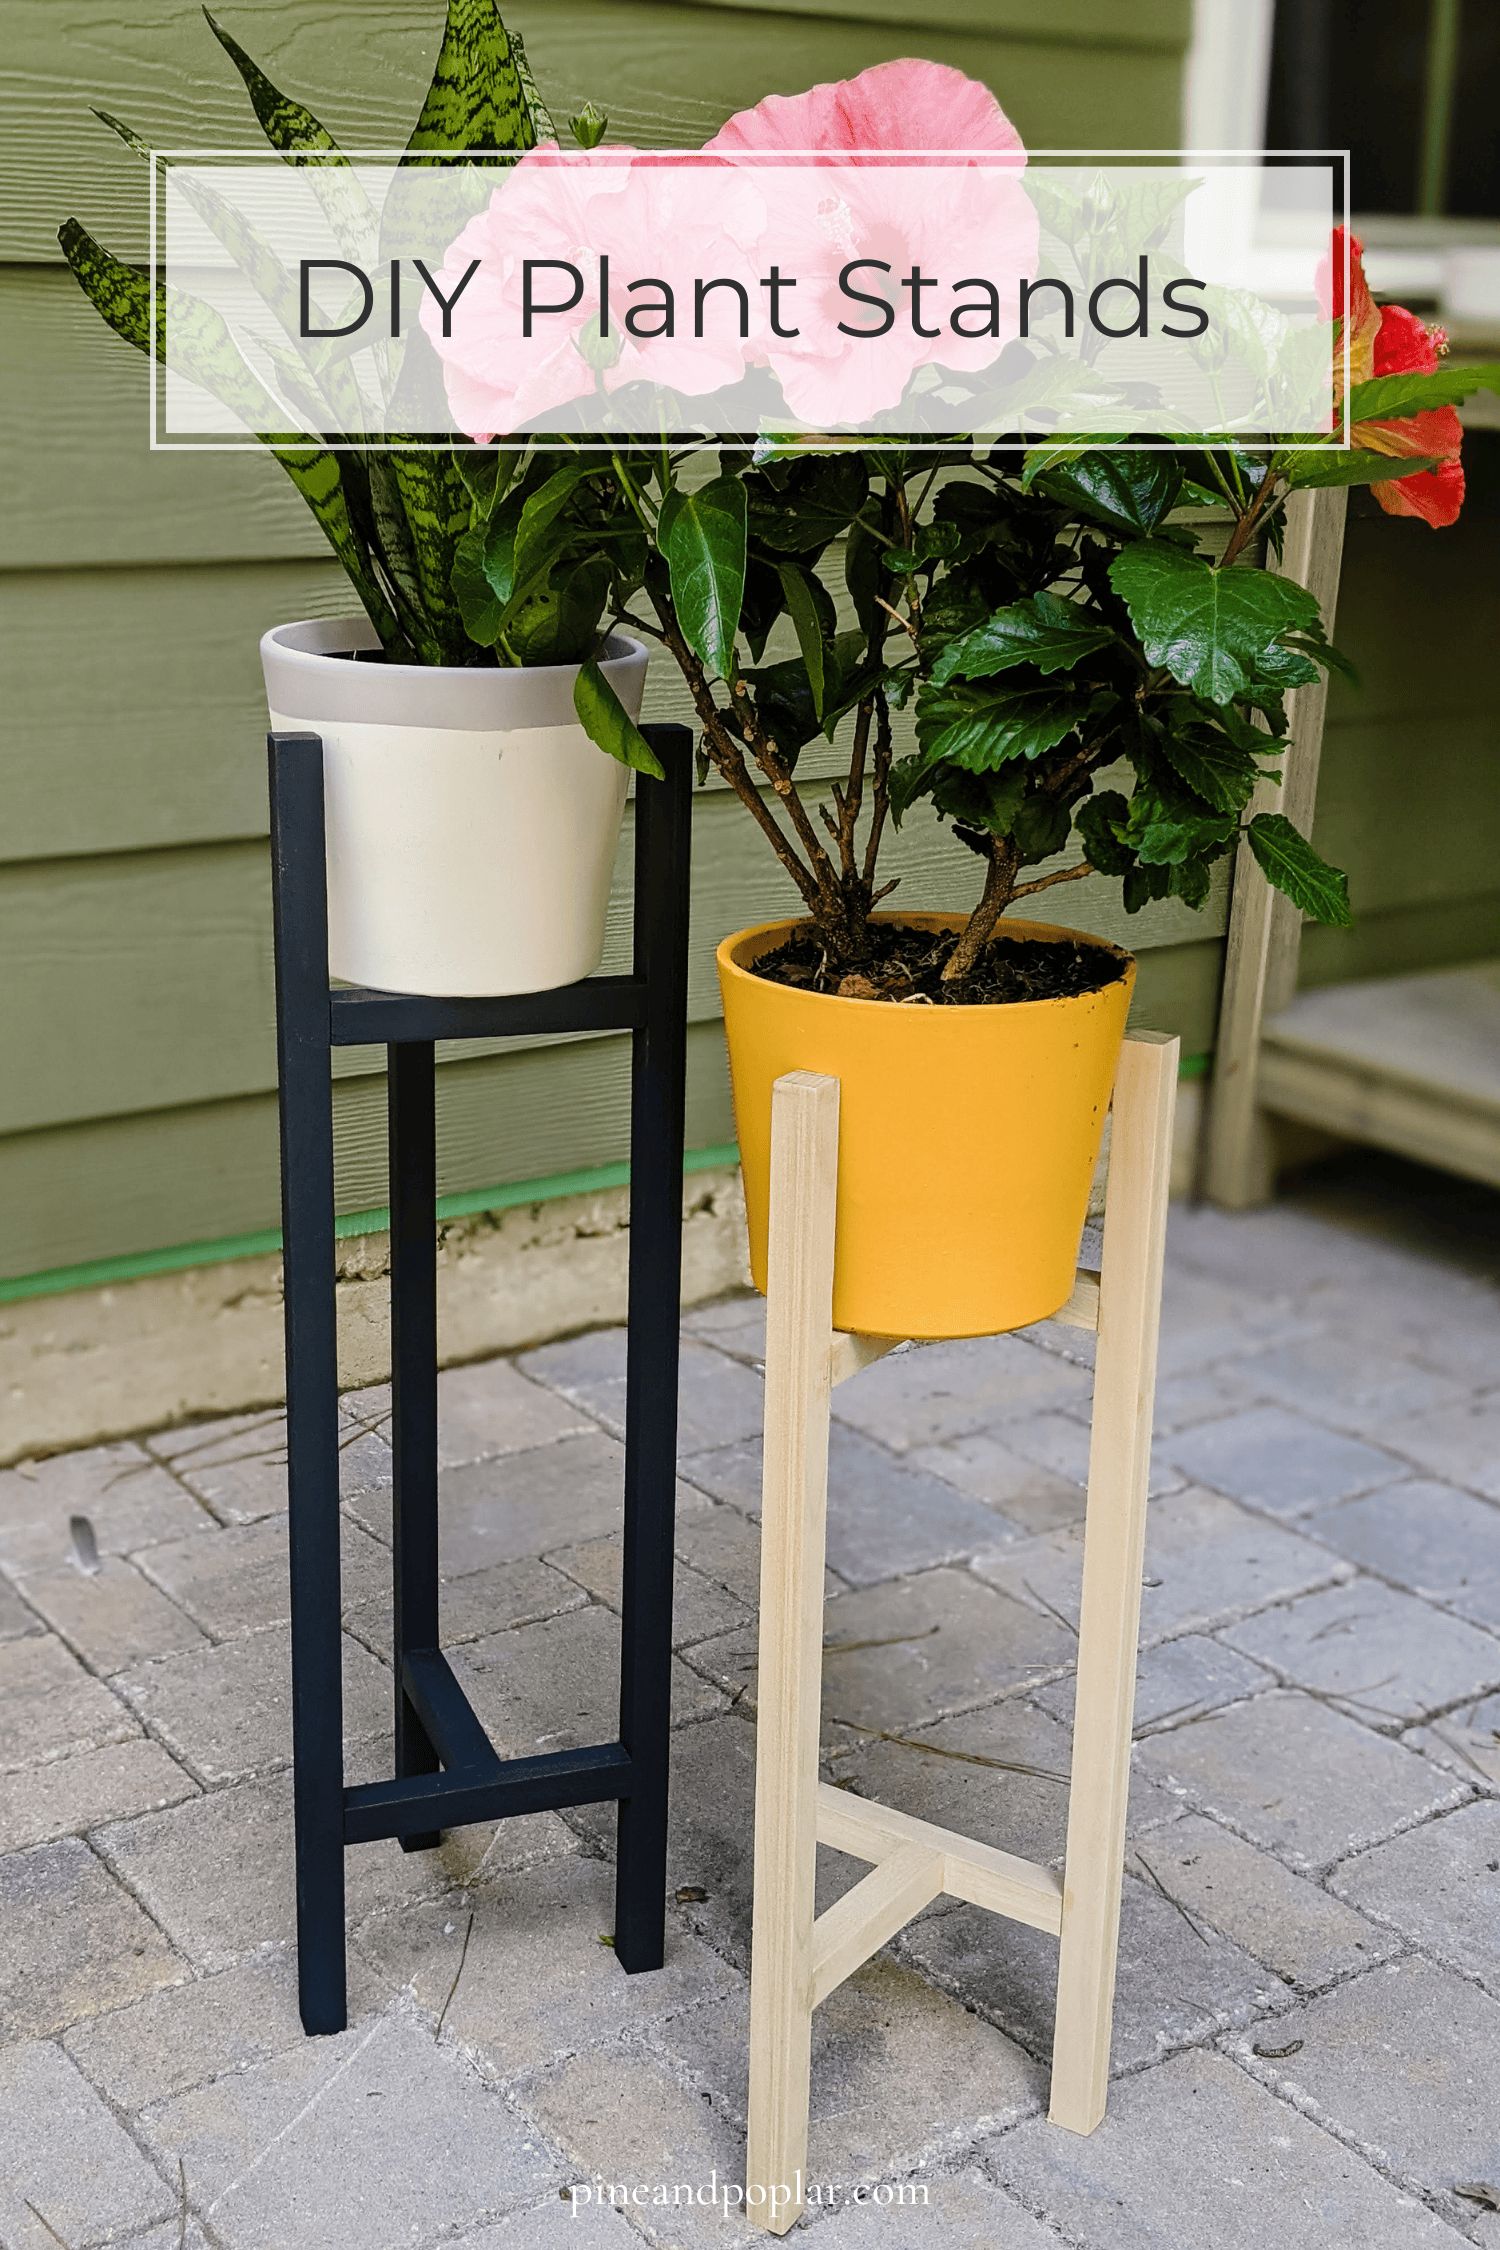 The Easiest Diy Plant Stand Plans Regarding Medium Plant Stands (View 12 of 15)